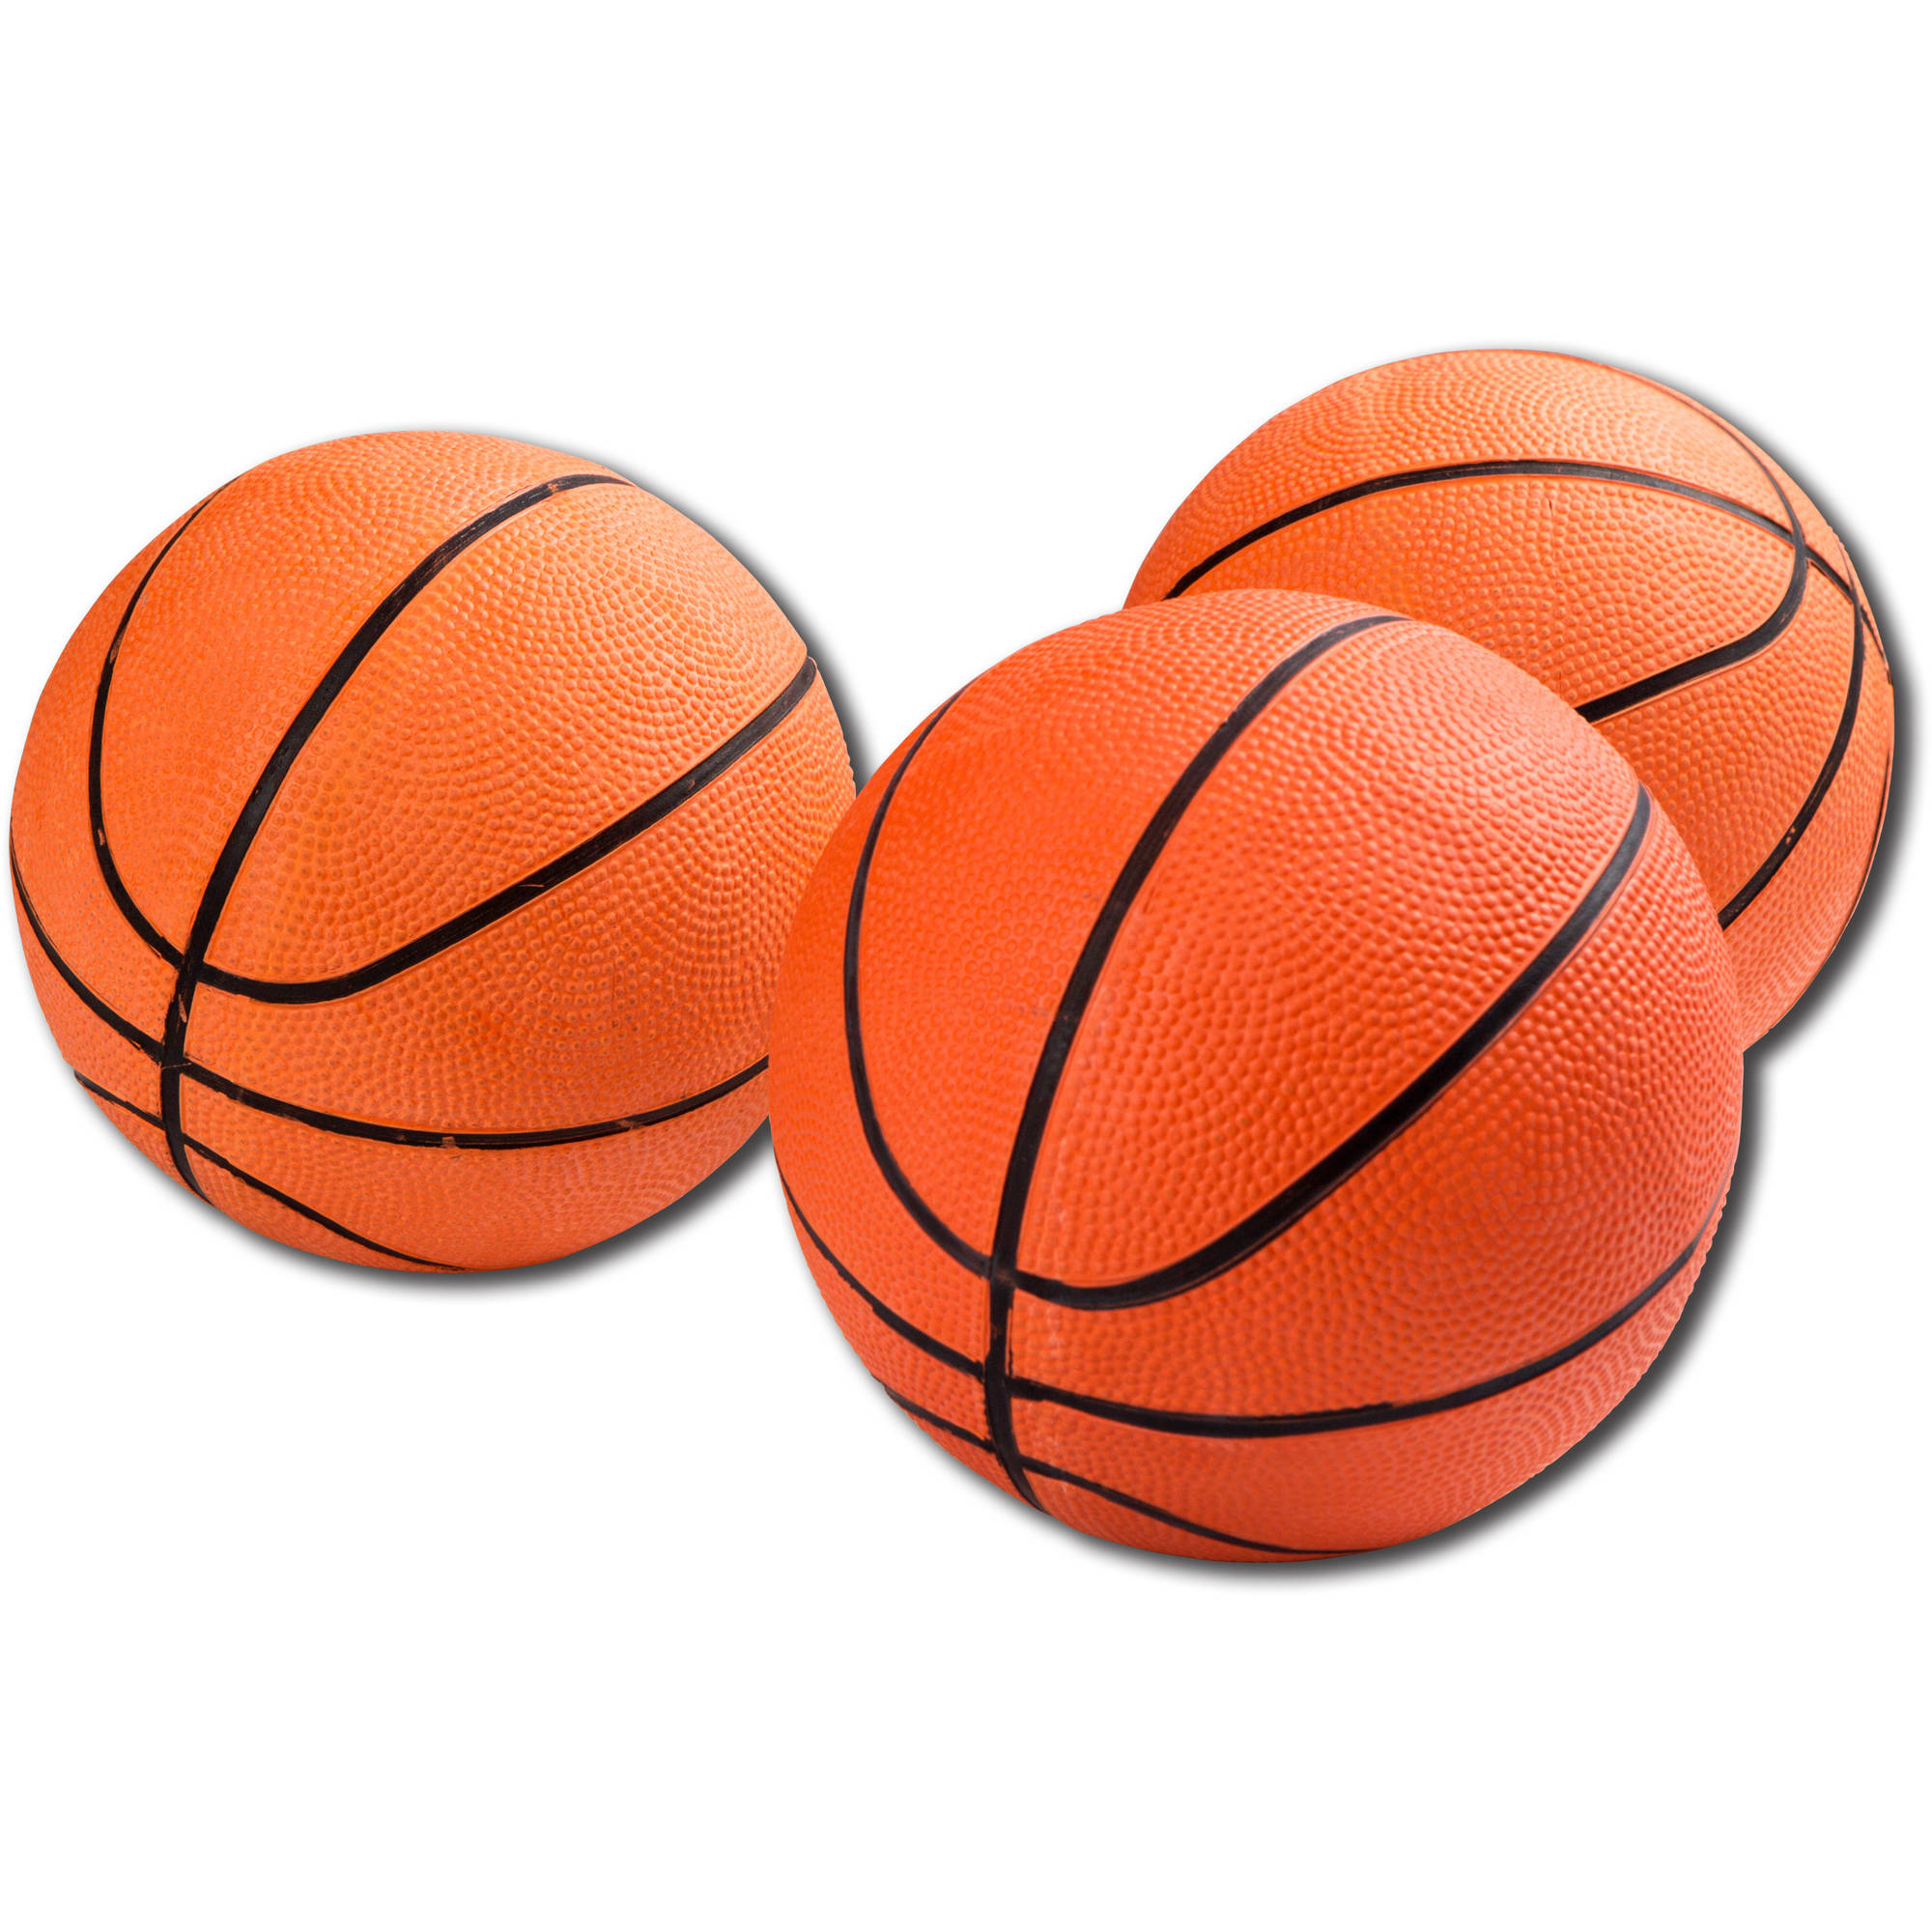 MD Sports 7" 3pcs Rubber Arcade Basketballs Replacement - image 1 of 10